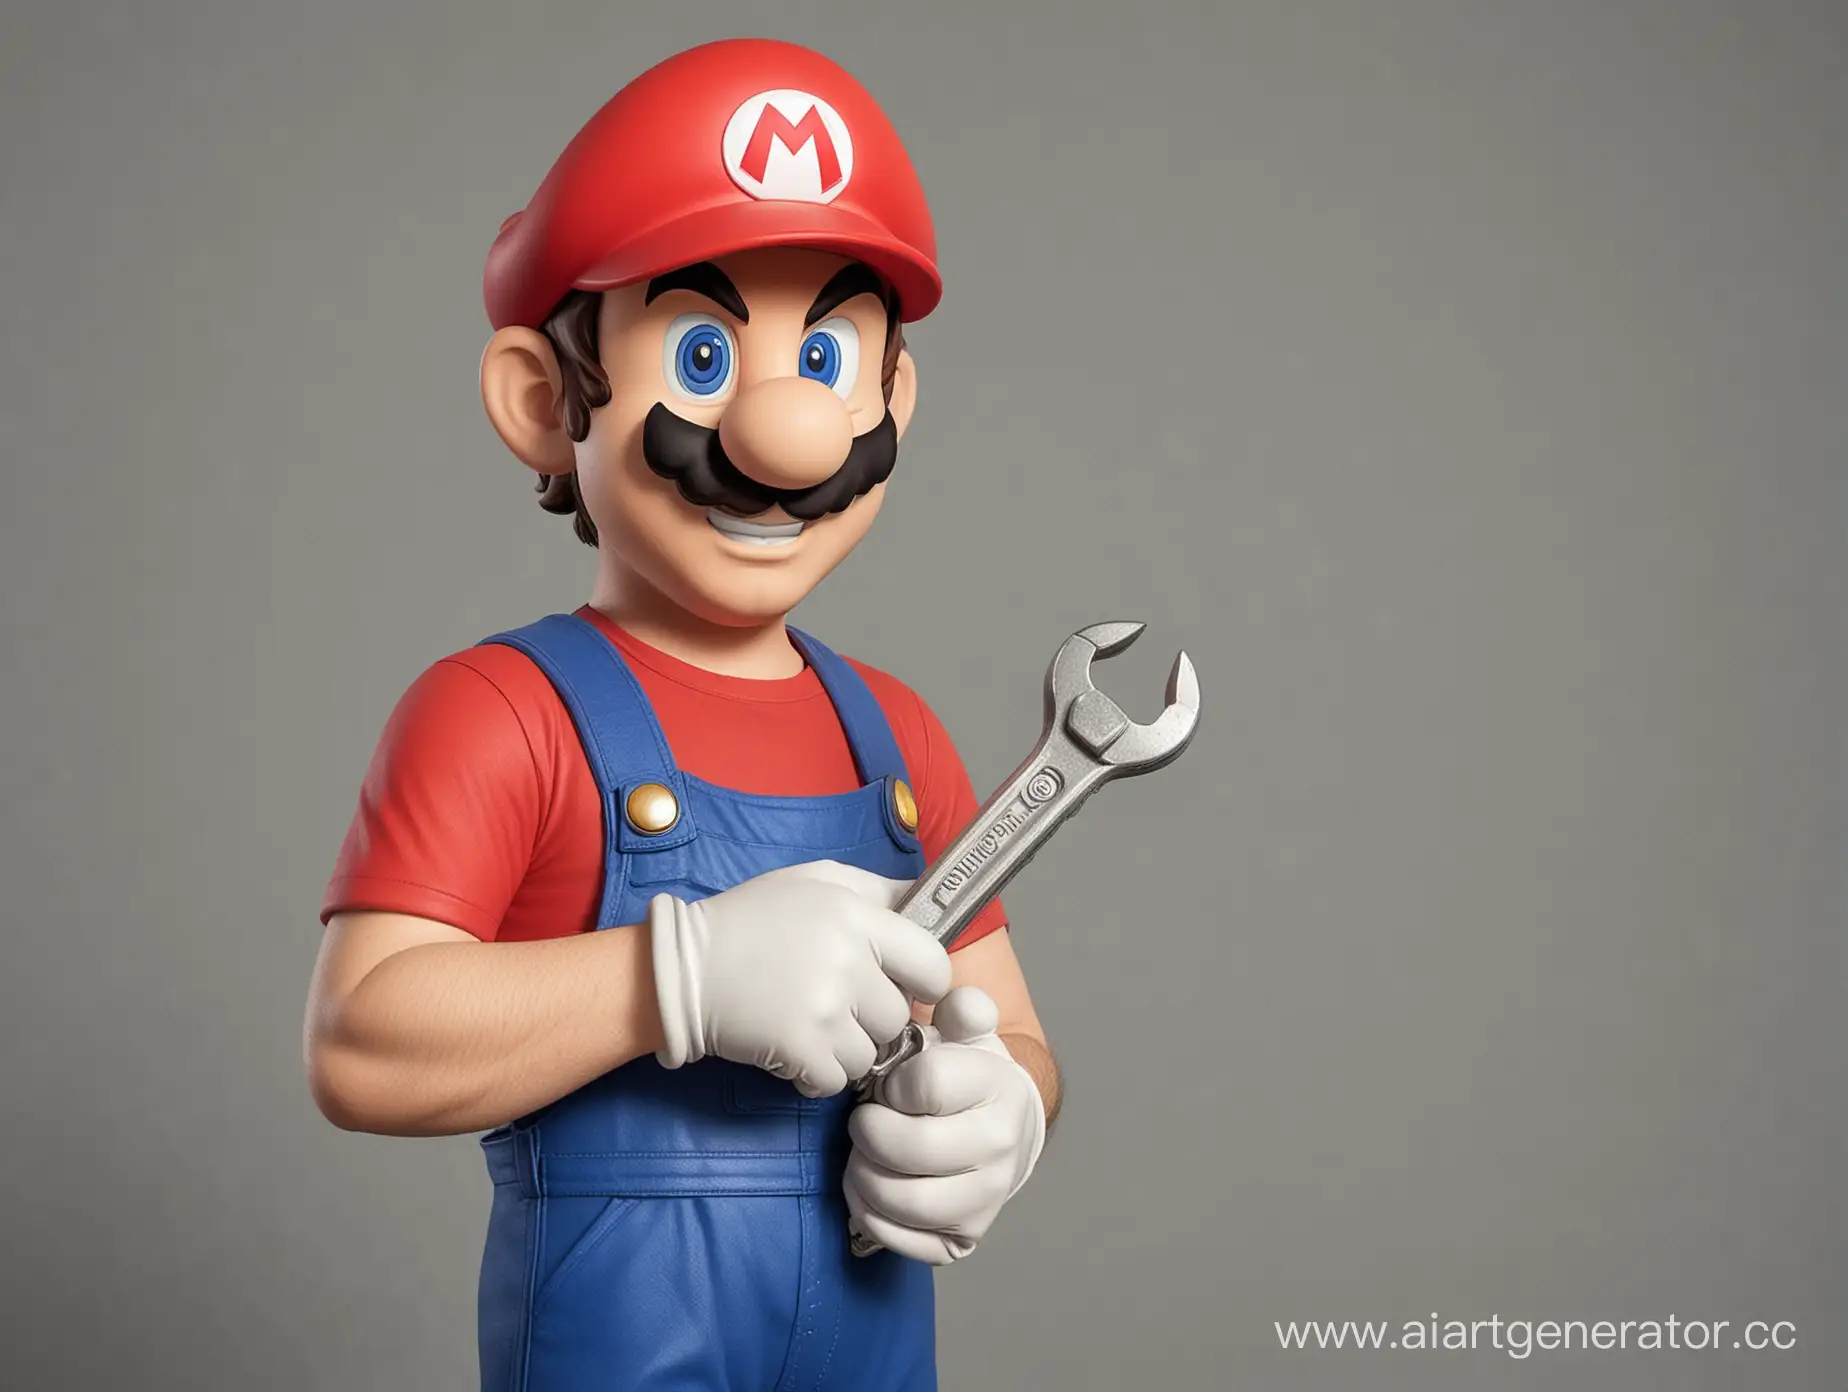 Mario is holding a wrench